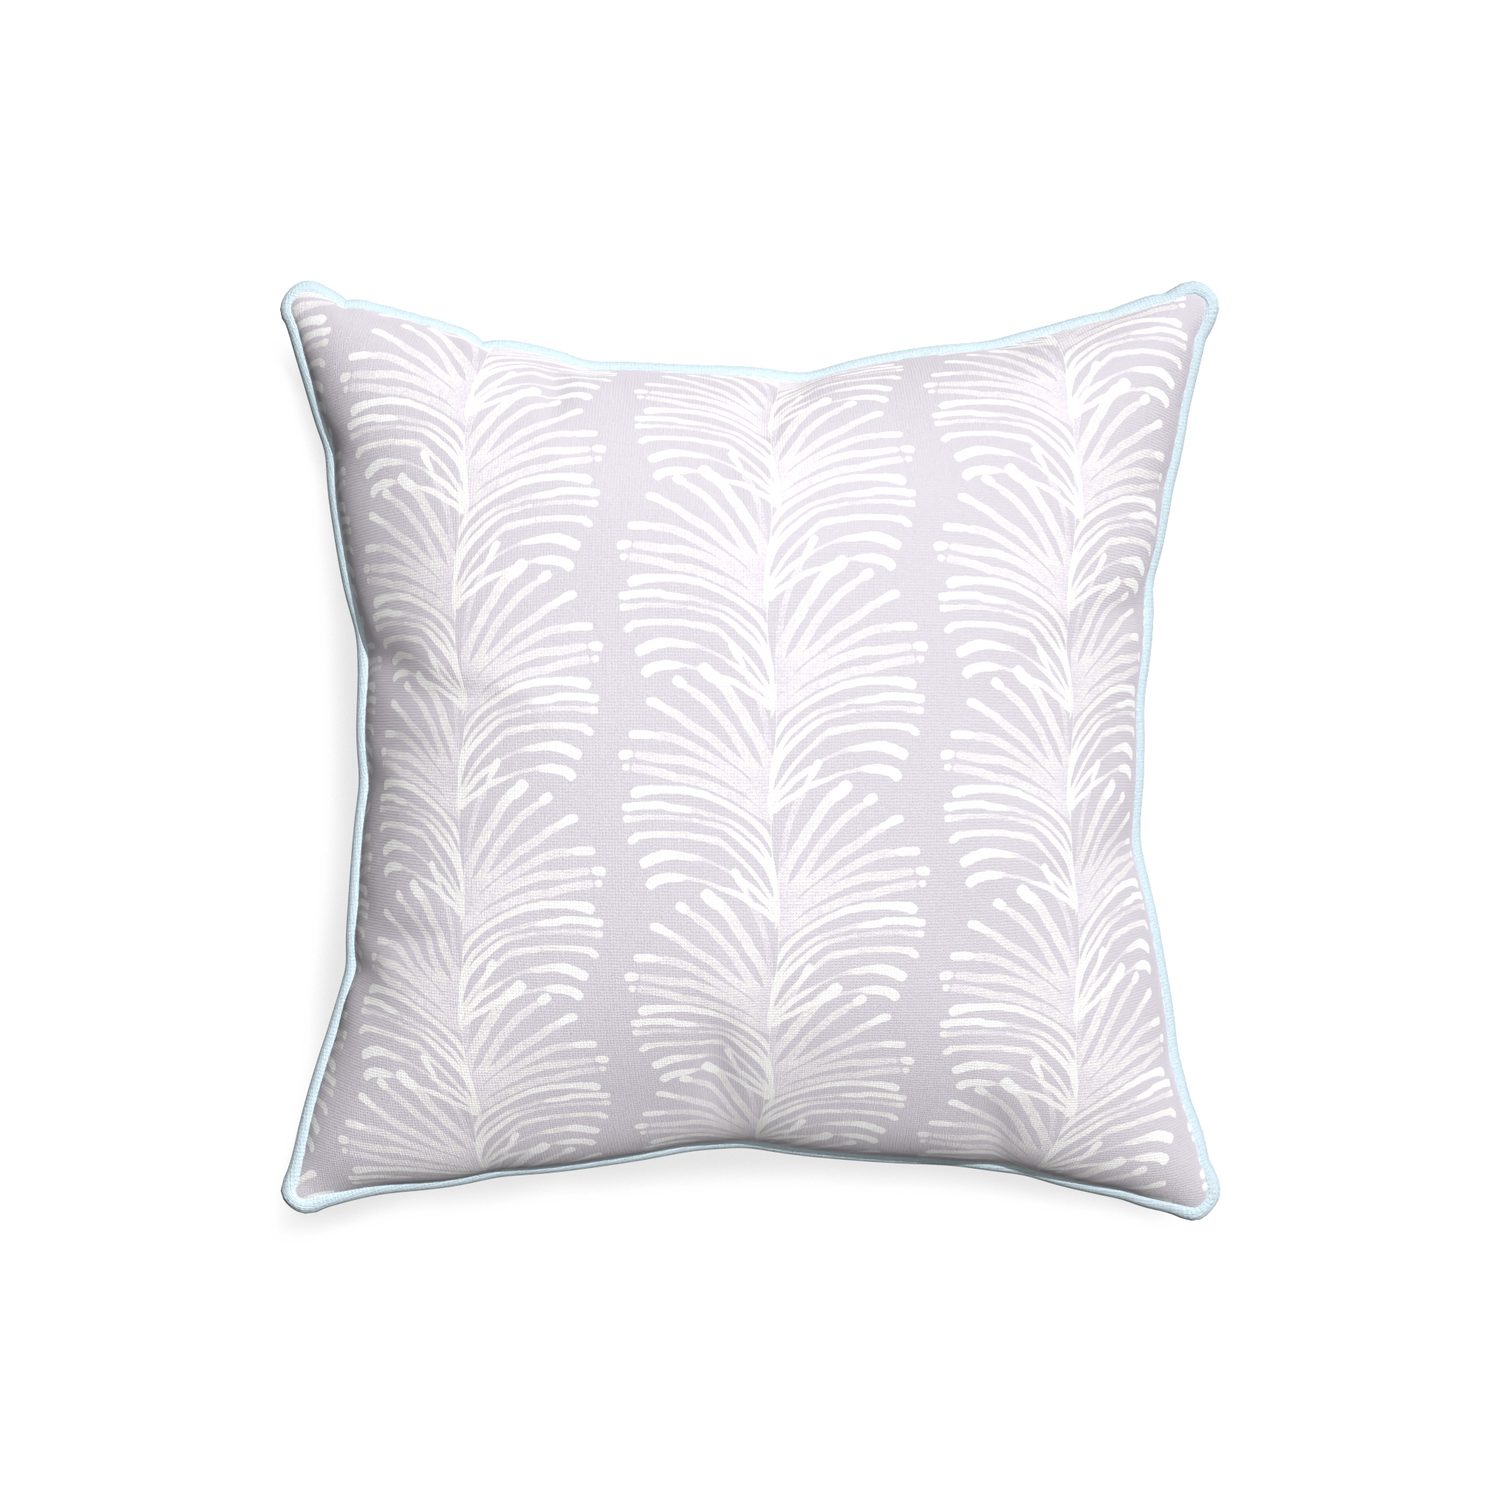 20-square emma lavender custom lavender botanical stripepillow with powder piping on white background